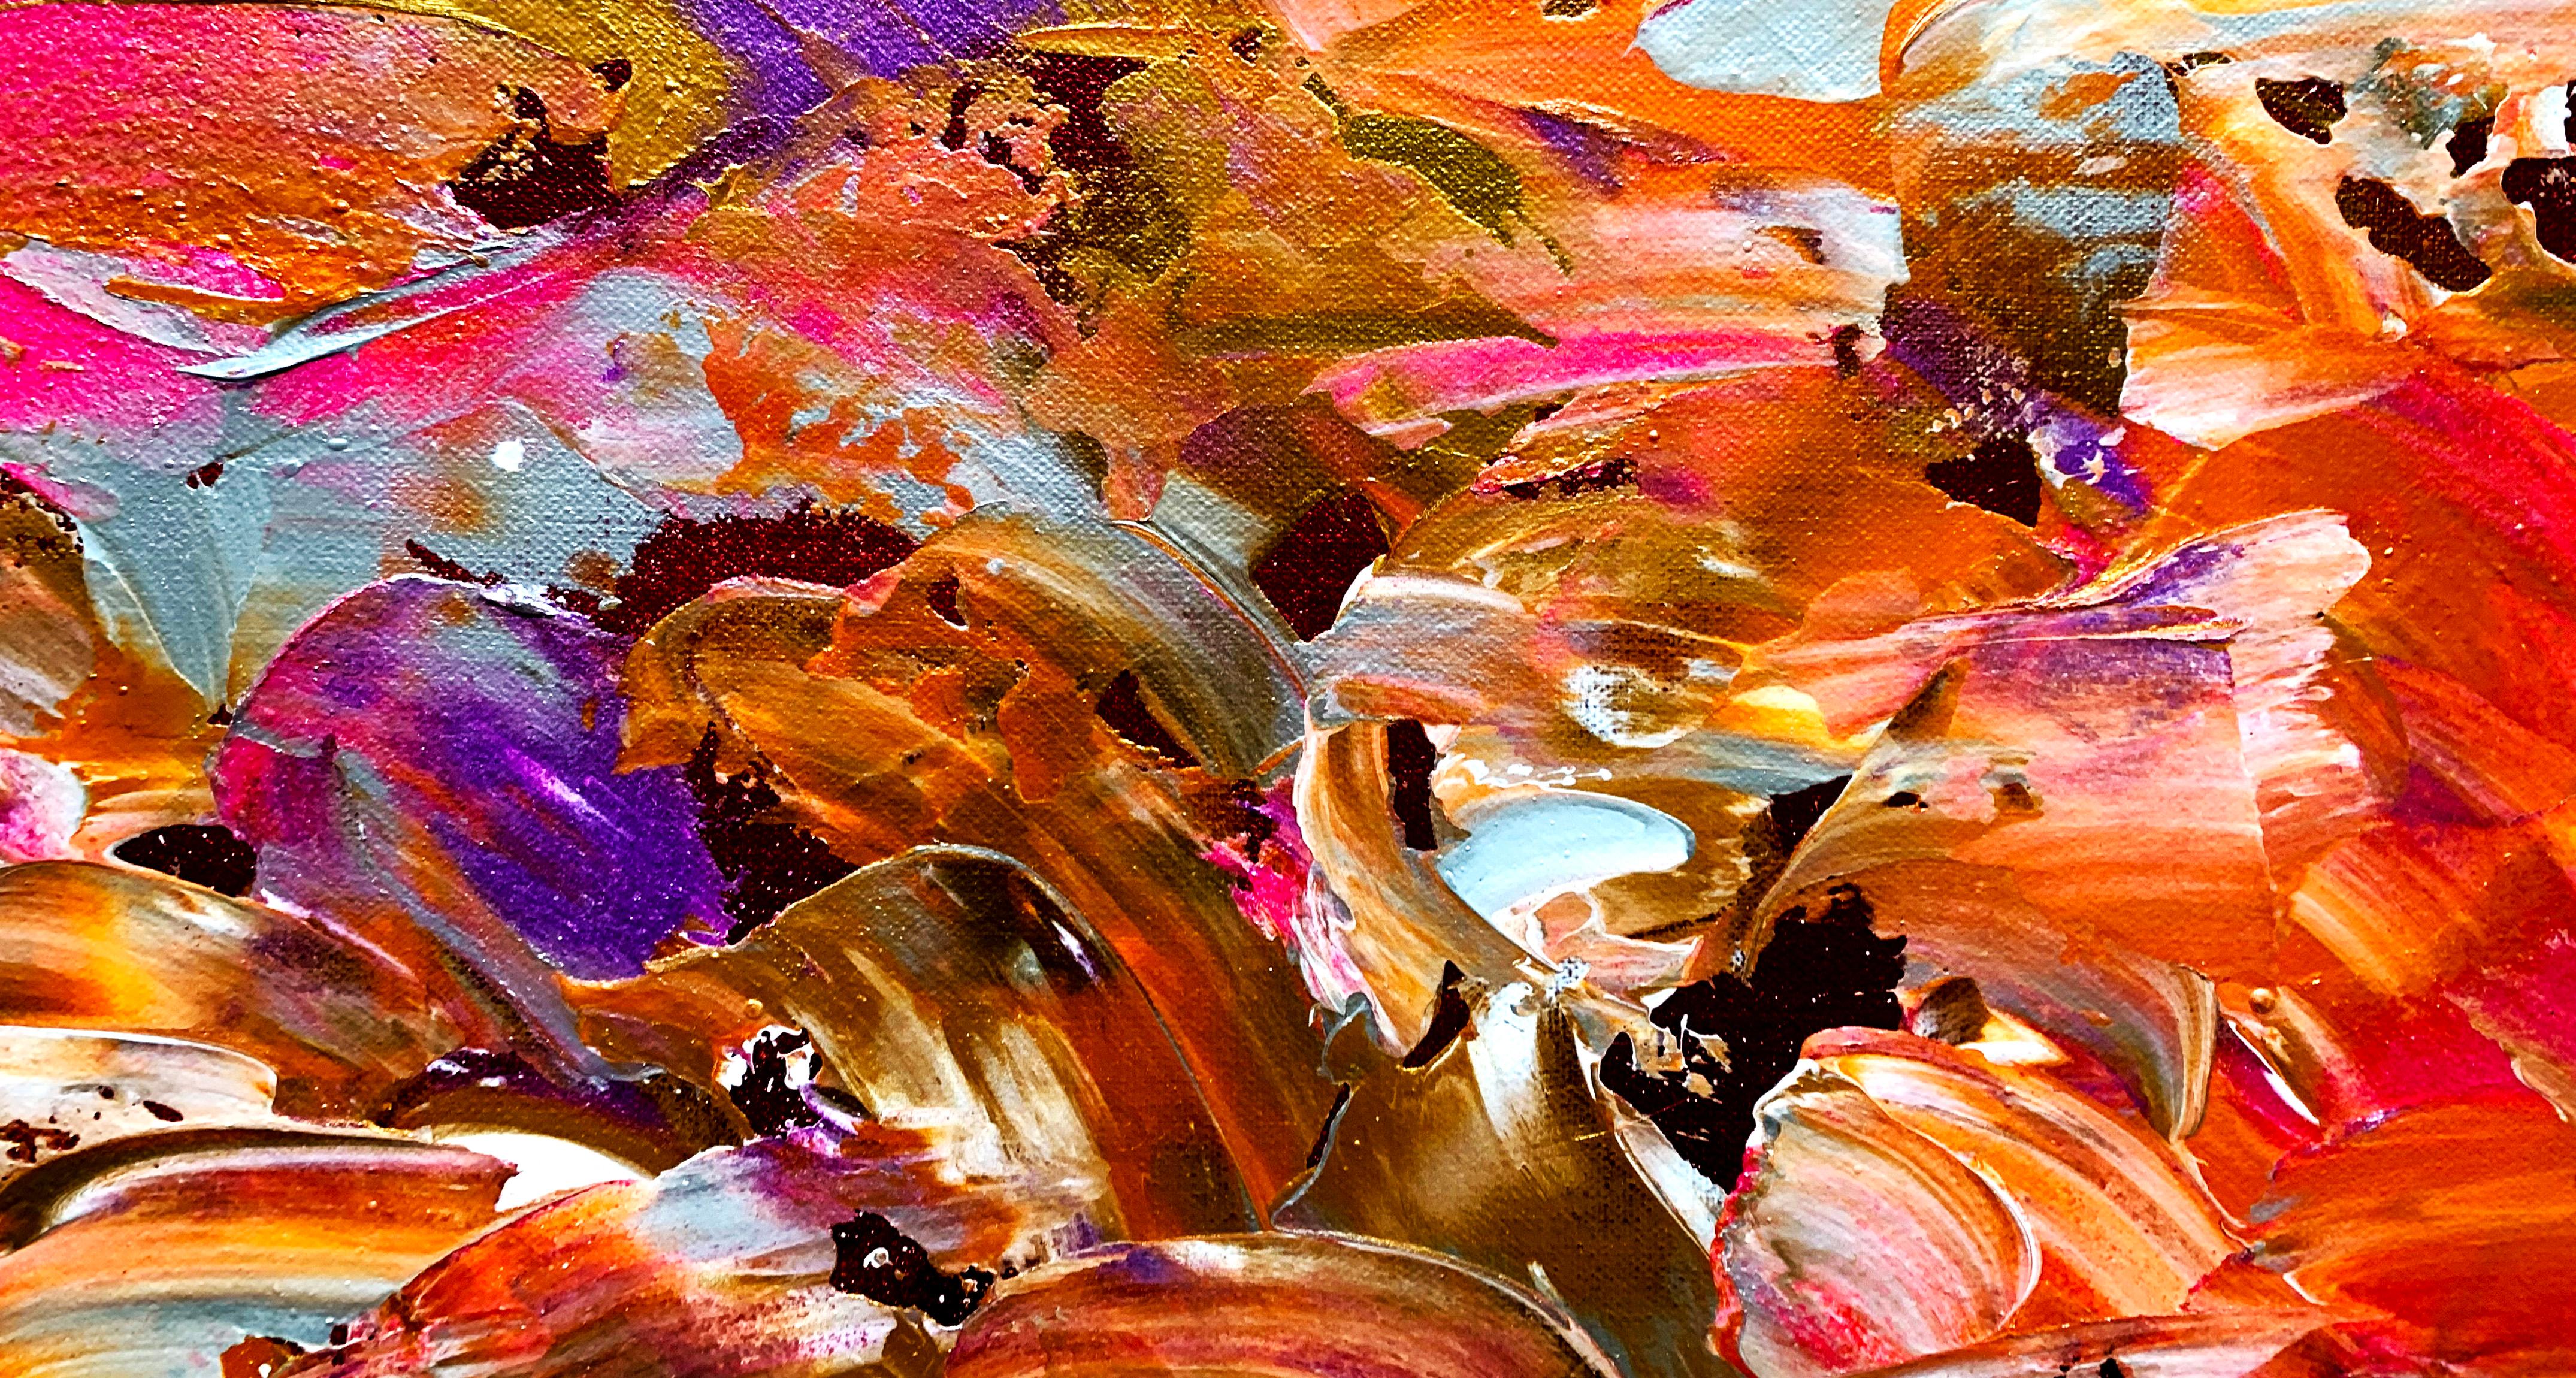 This painting is an exploration of different colours being embraced by other. In particular pink and orange tones being embraced by golden tones. Painted in the style of abstract expressionism.

This work is painted on professional-grade canvas and